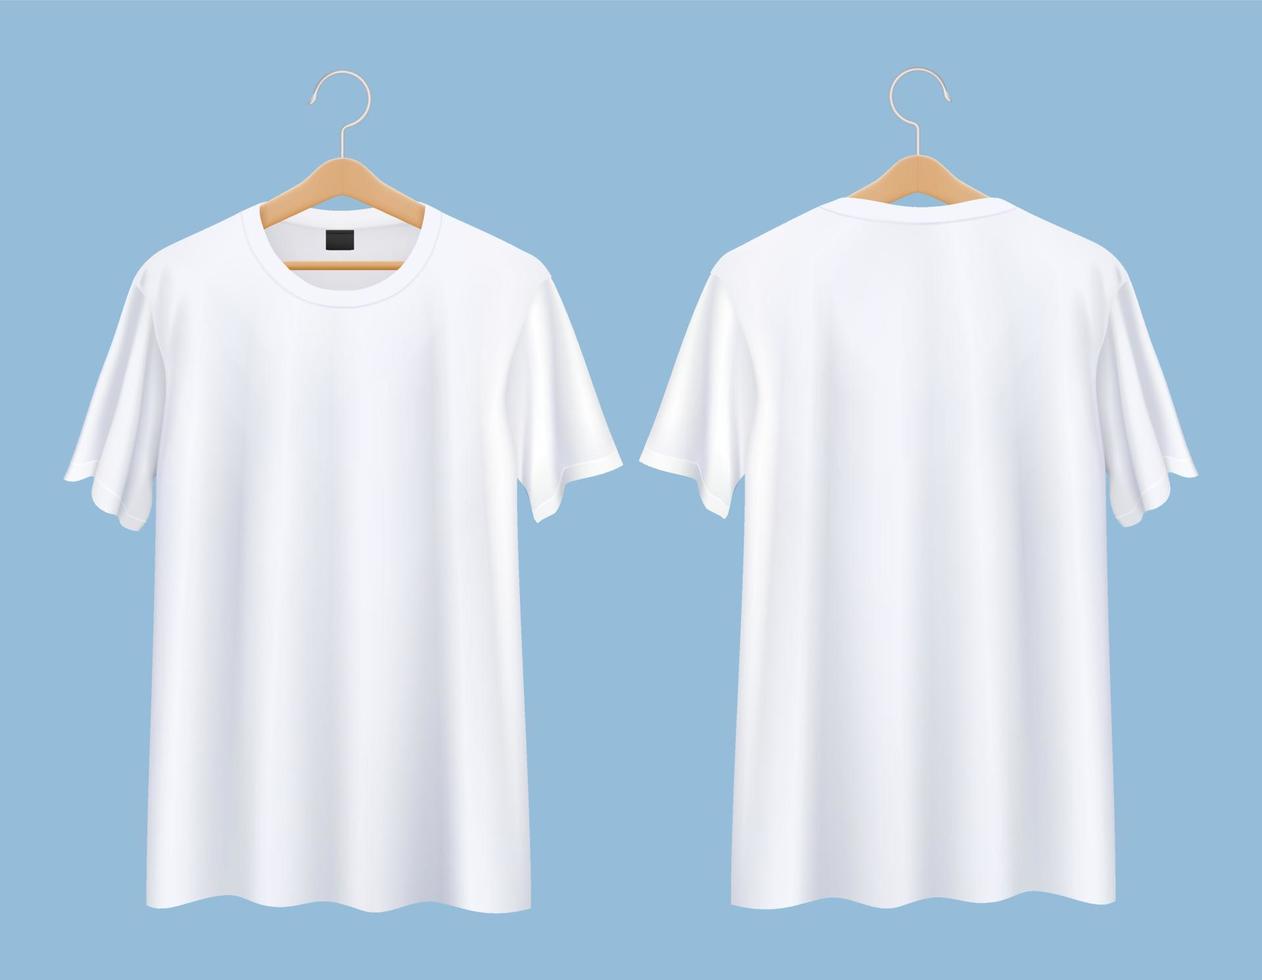 T-shirt with clothes hanger mockup front and back illustrations vector